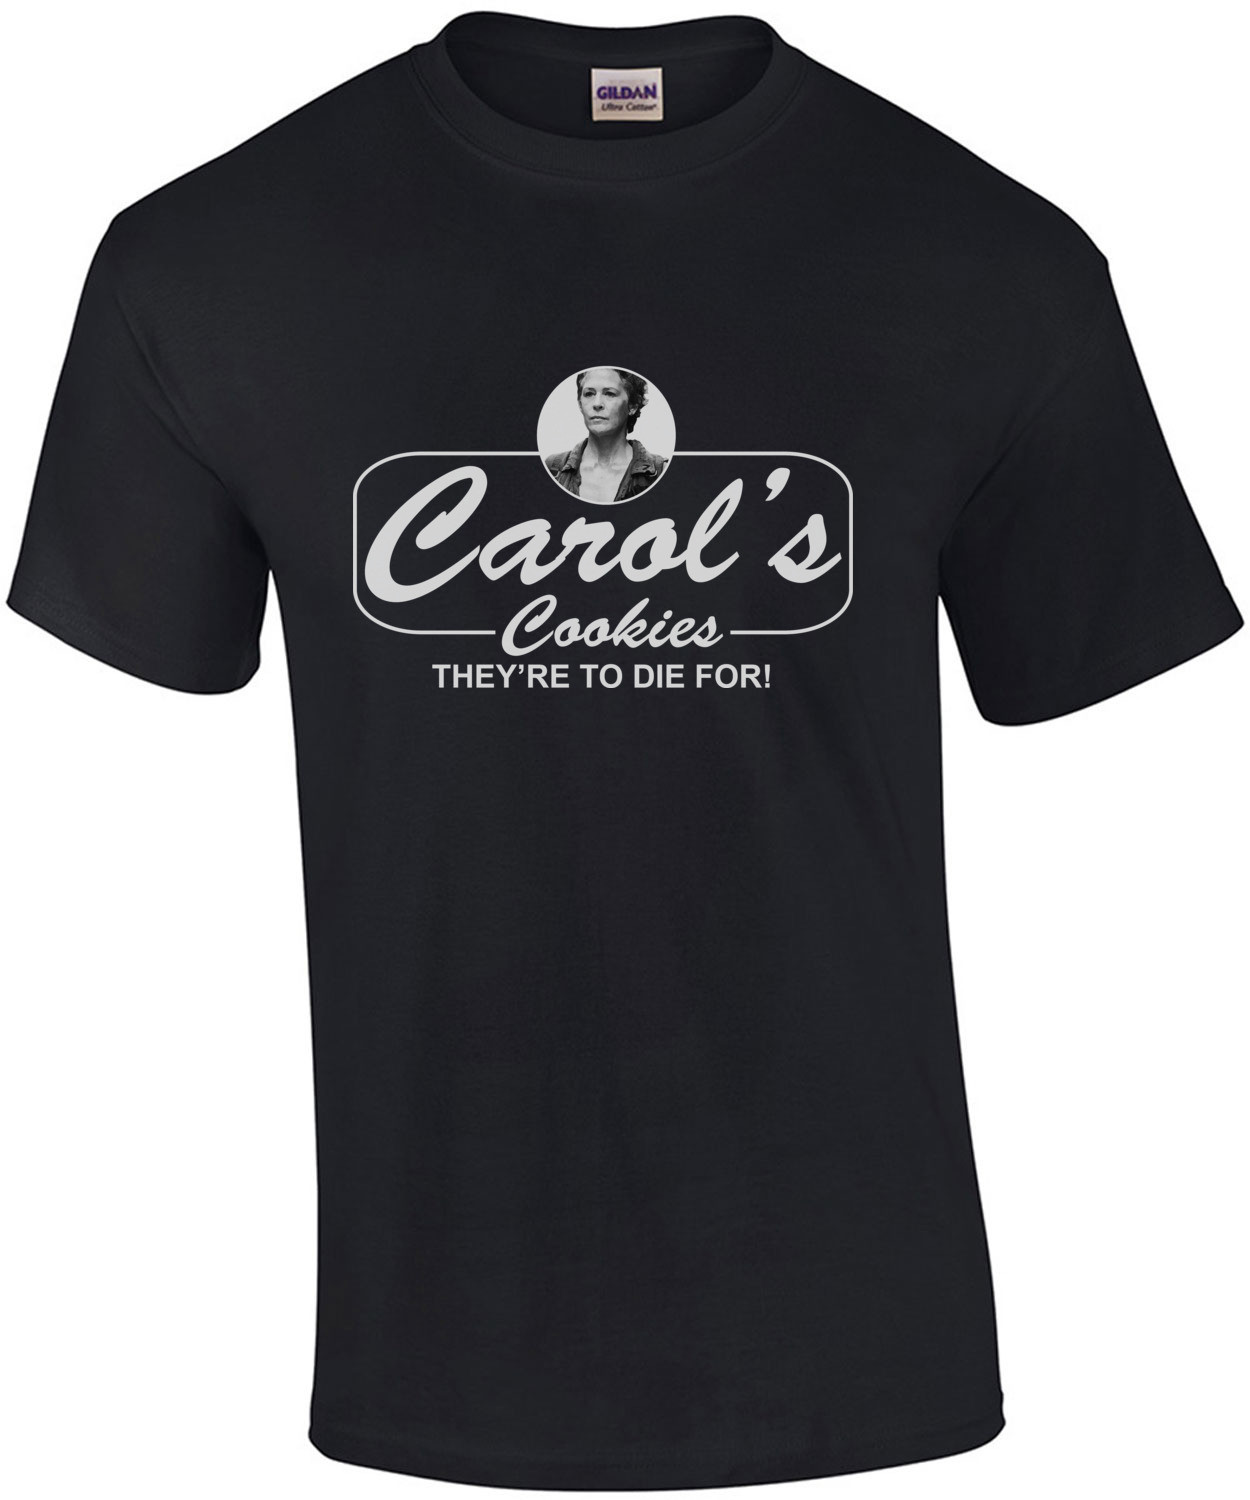 Carol's Cookies - They're to die for! The Walking Dead T-shirt